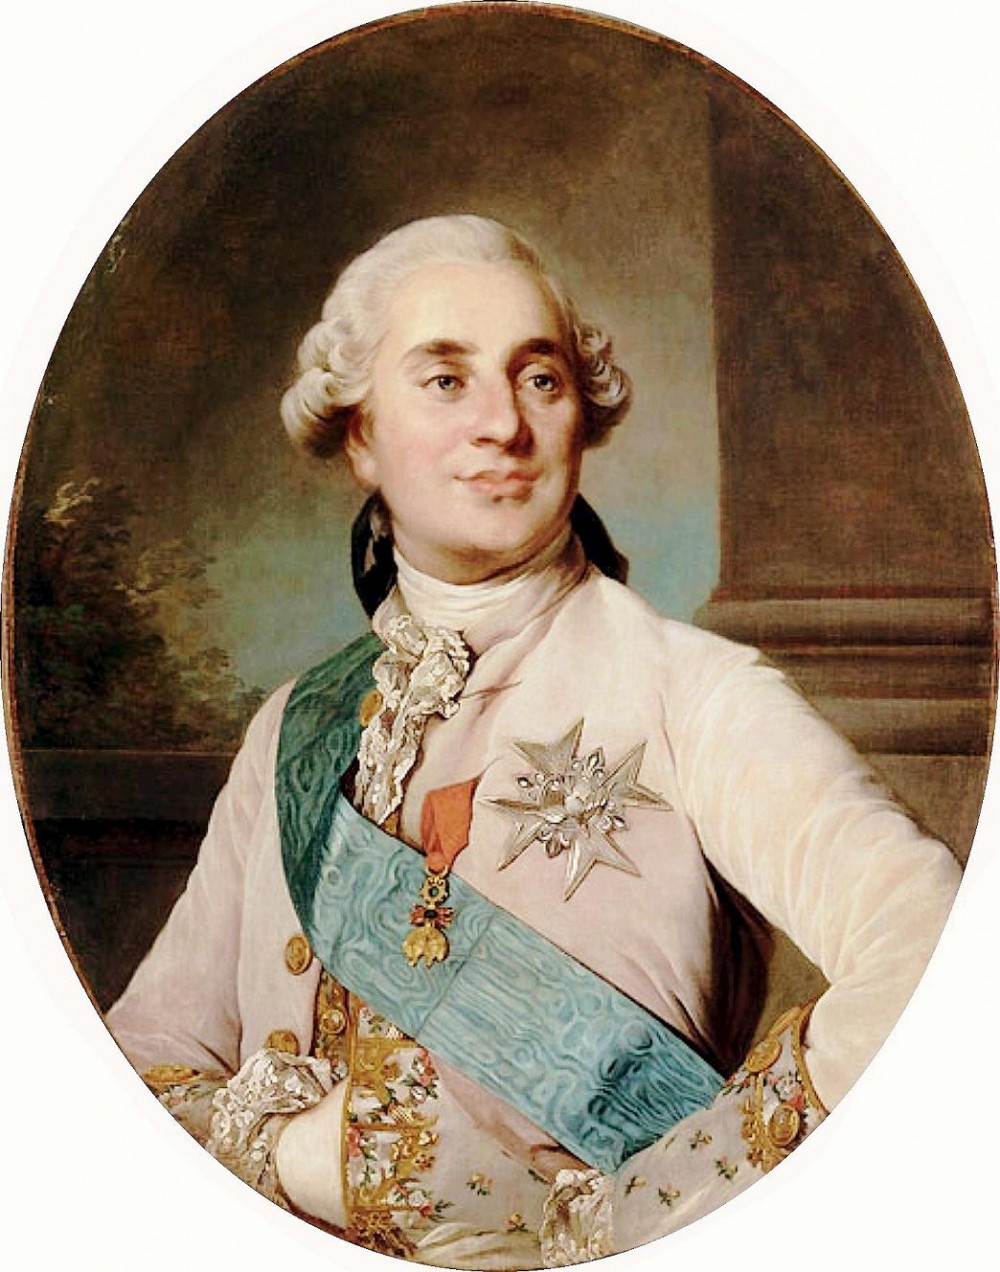 A Good King: 21 January. The Memorial Day for King Louis XVI | Voices from Russia